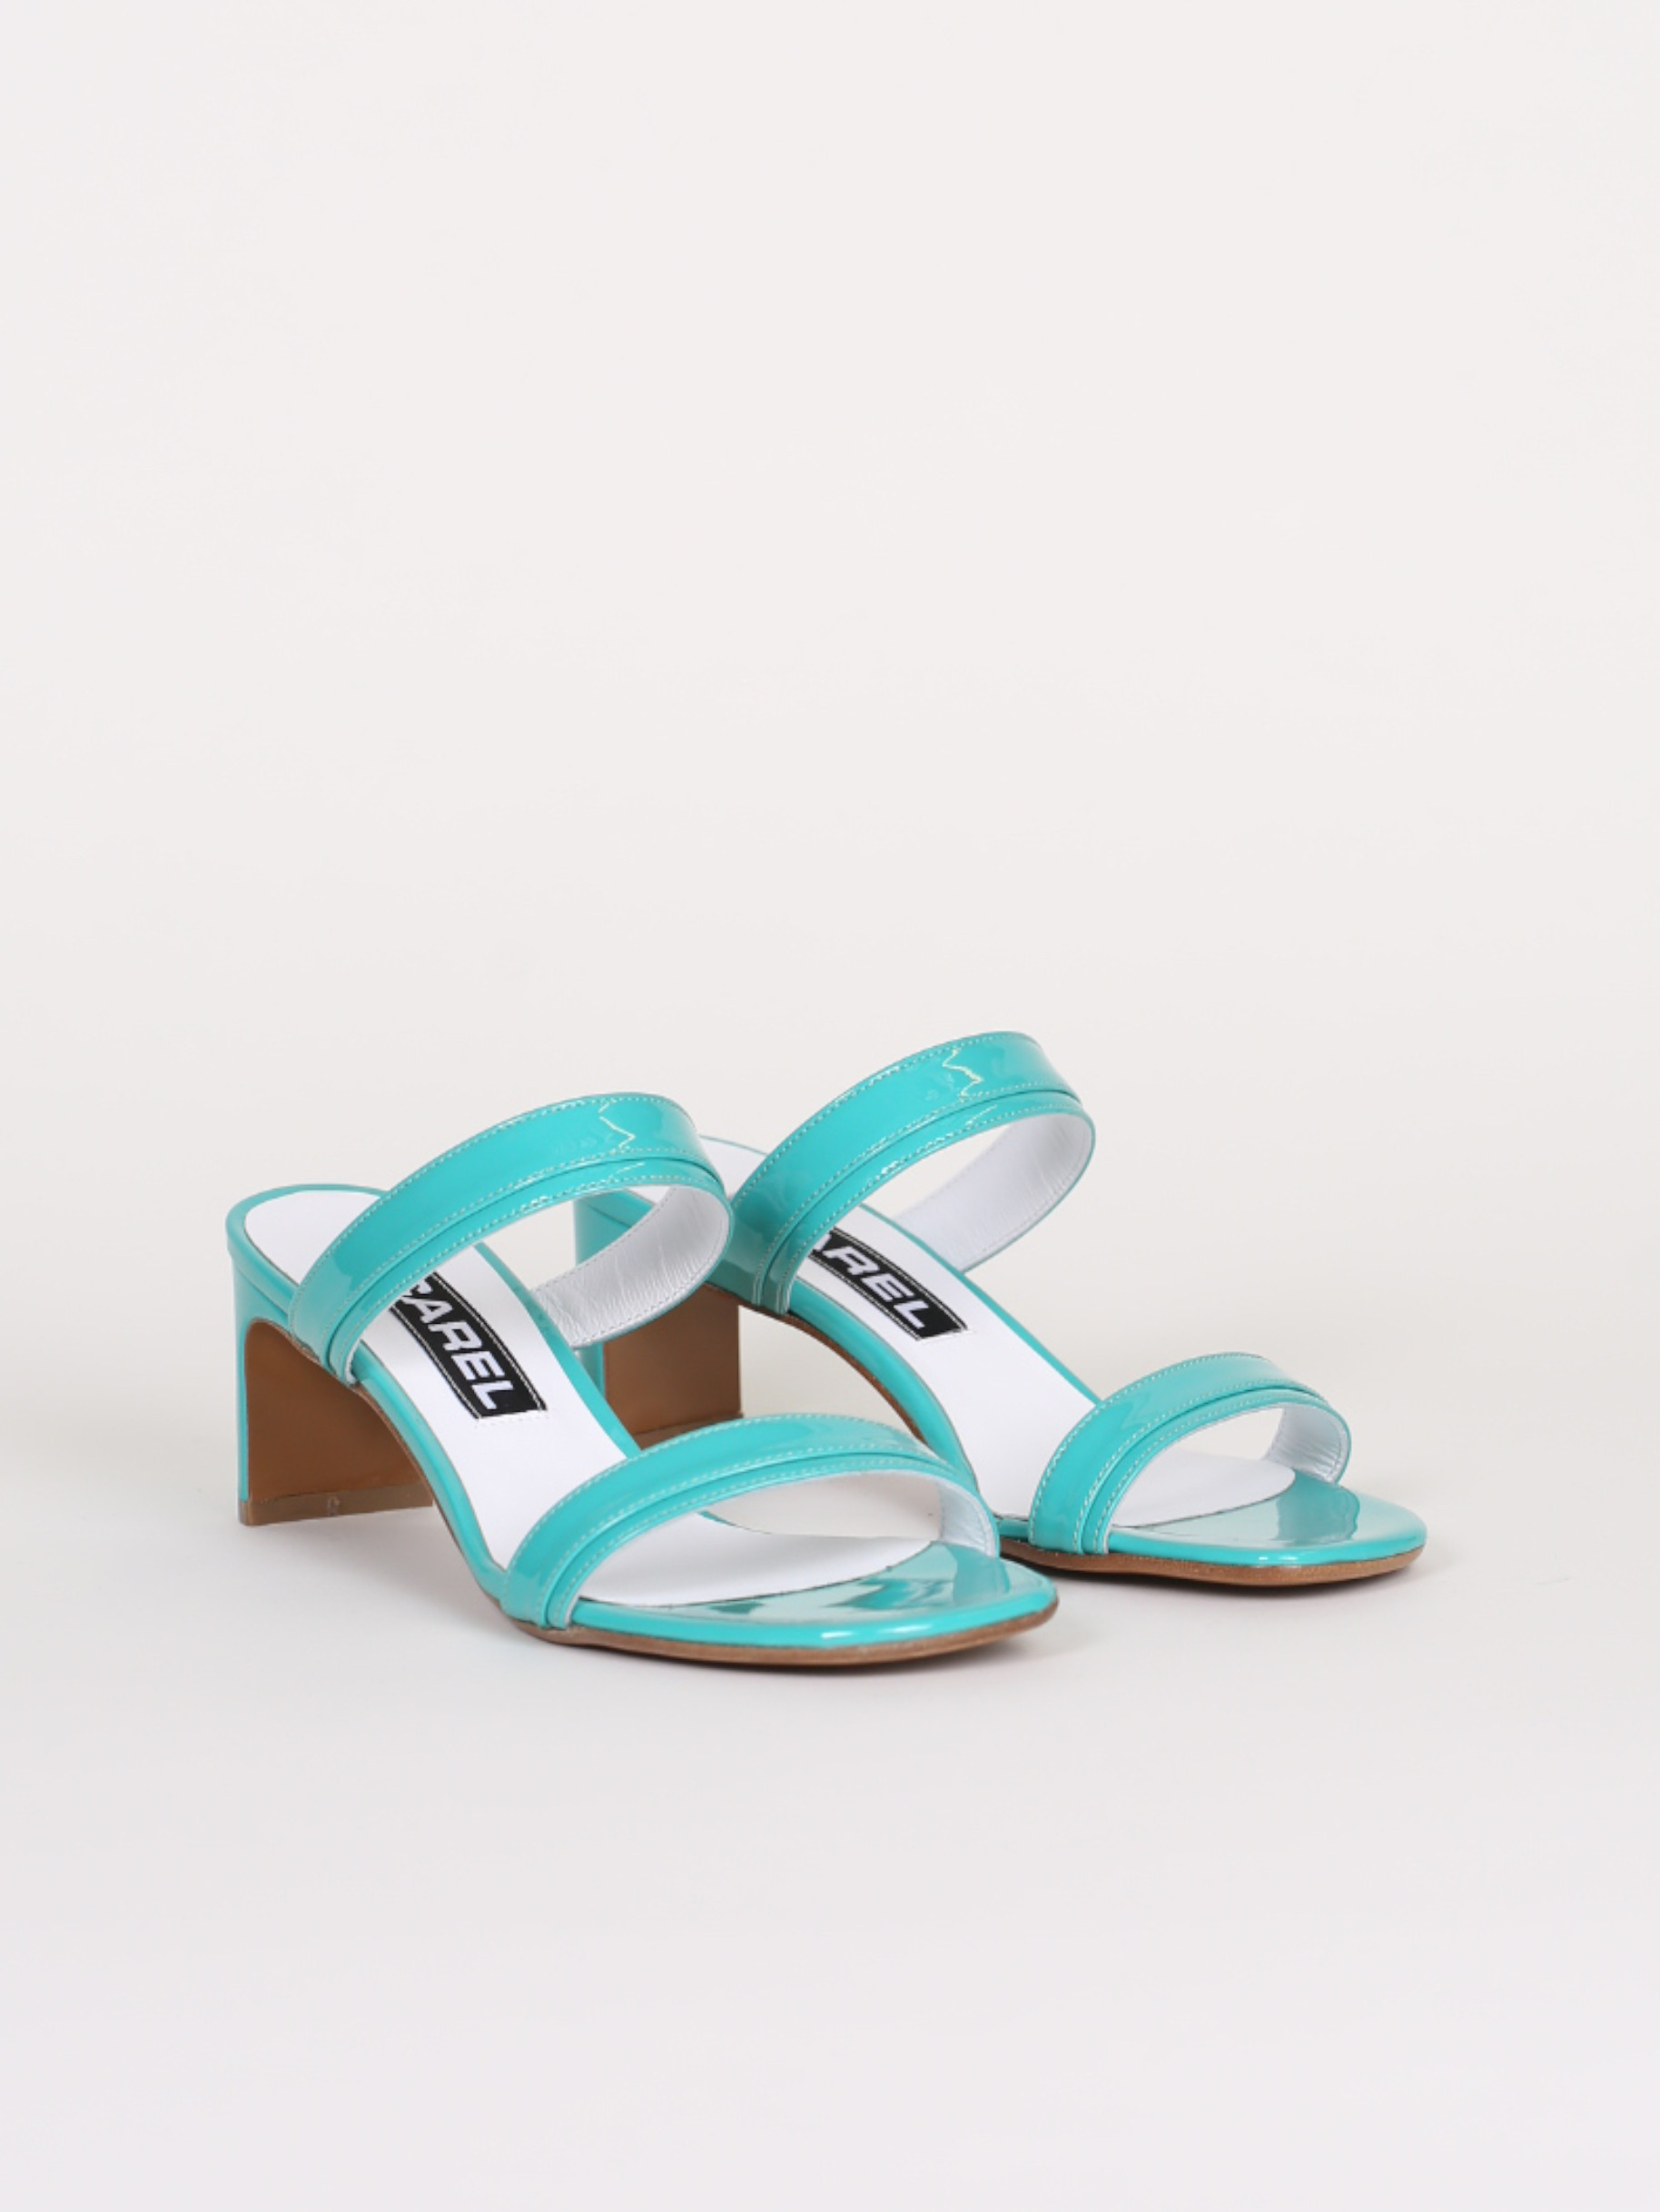 Turquoise patent leather mules